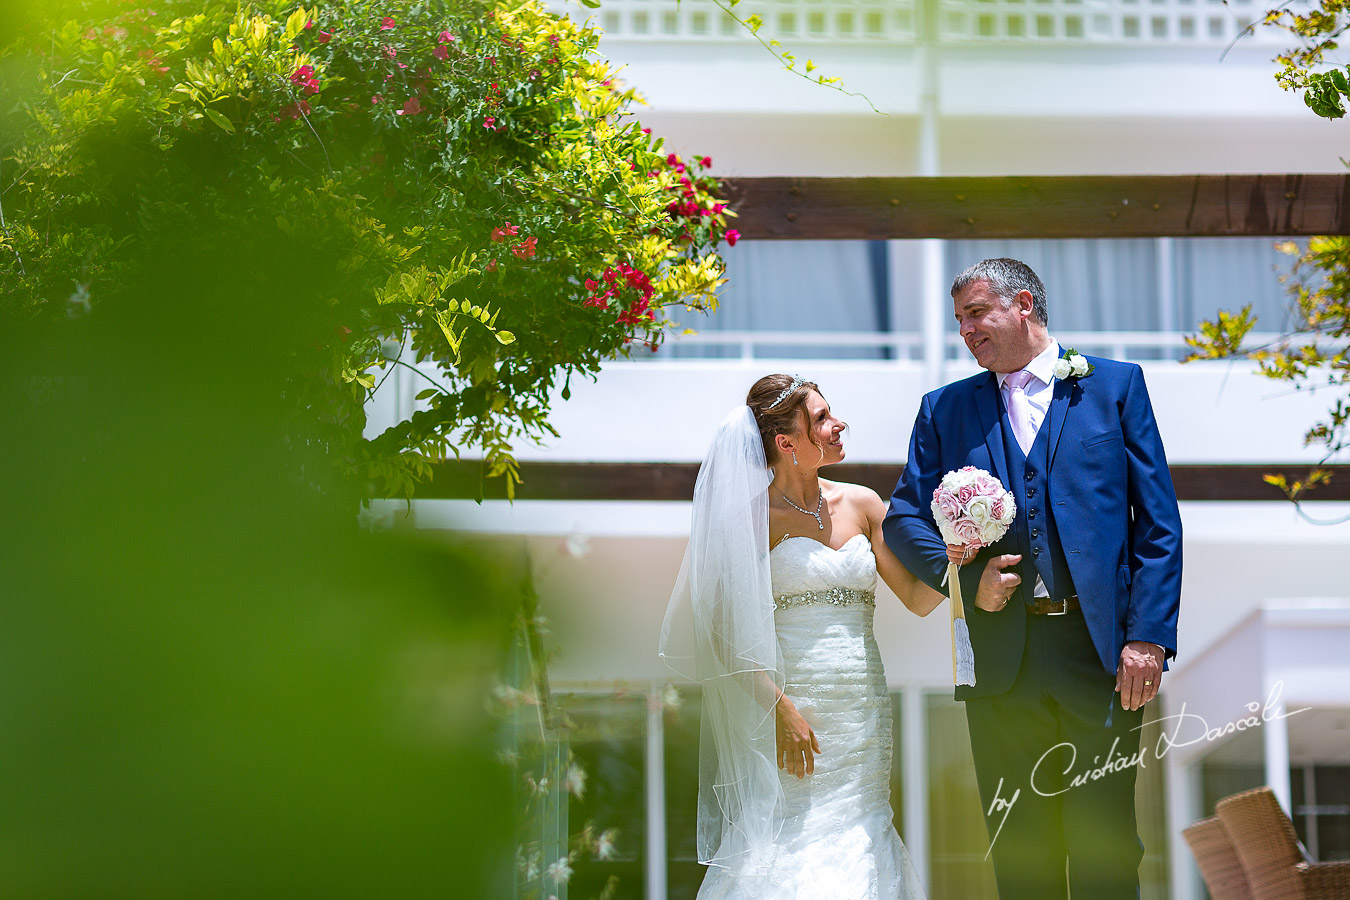 The bride Alicia and her father photographed at Nissi Beach Resort in Ayia Napa, Cyprus by Cristian Dascalu.